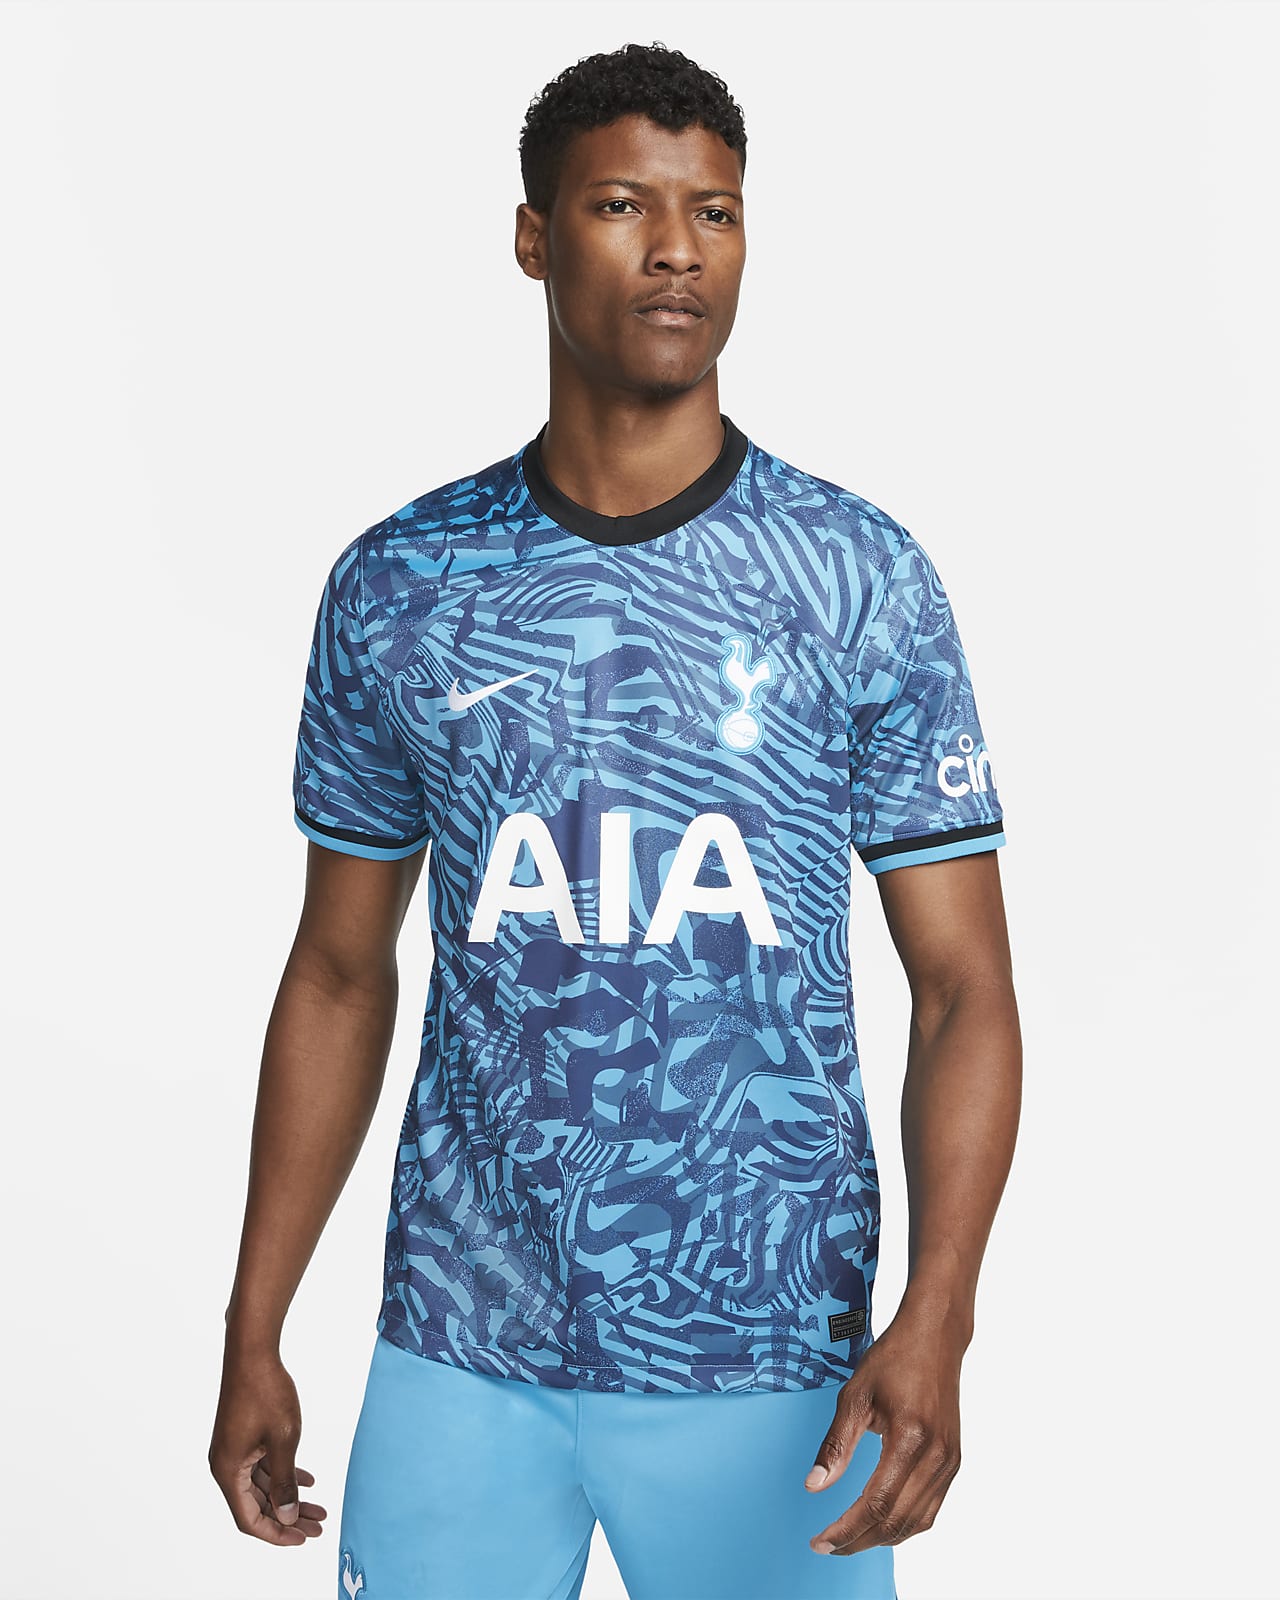 Dare To Do True – 2022/23 Nike Home Kit unveiled